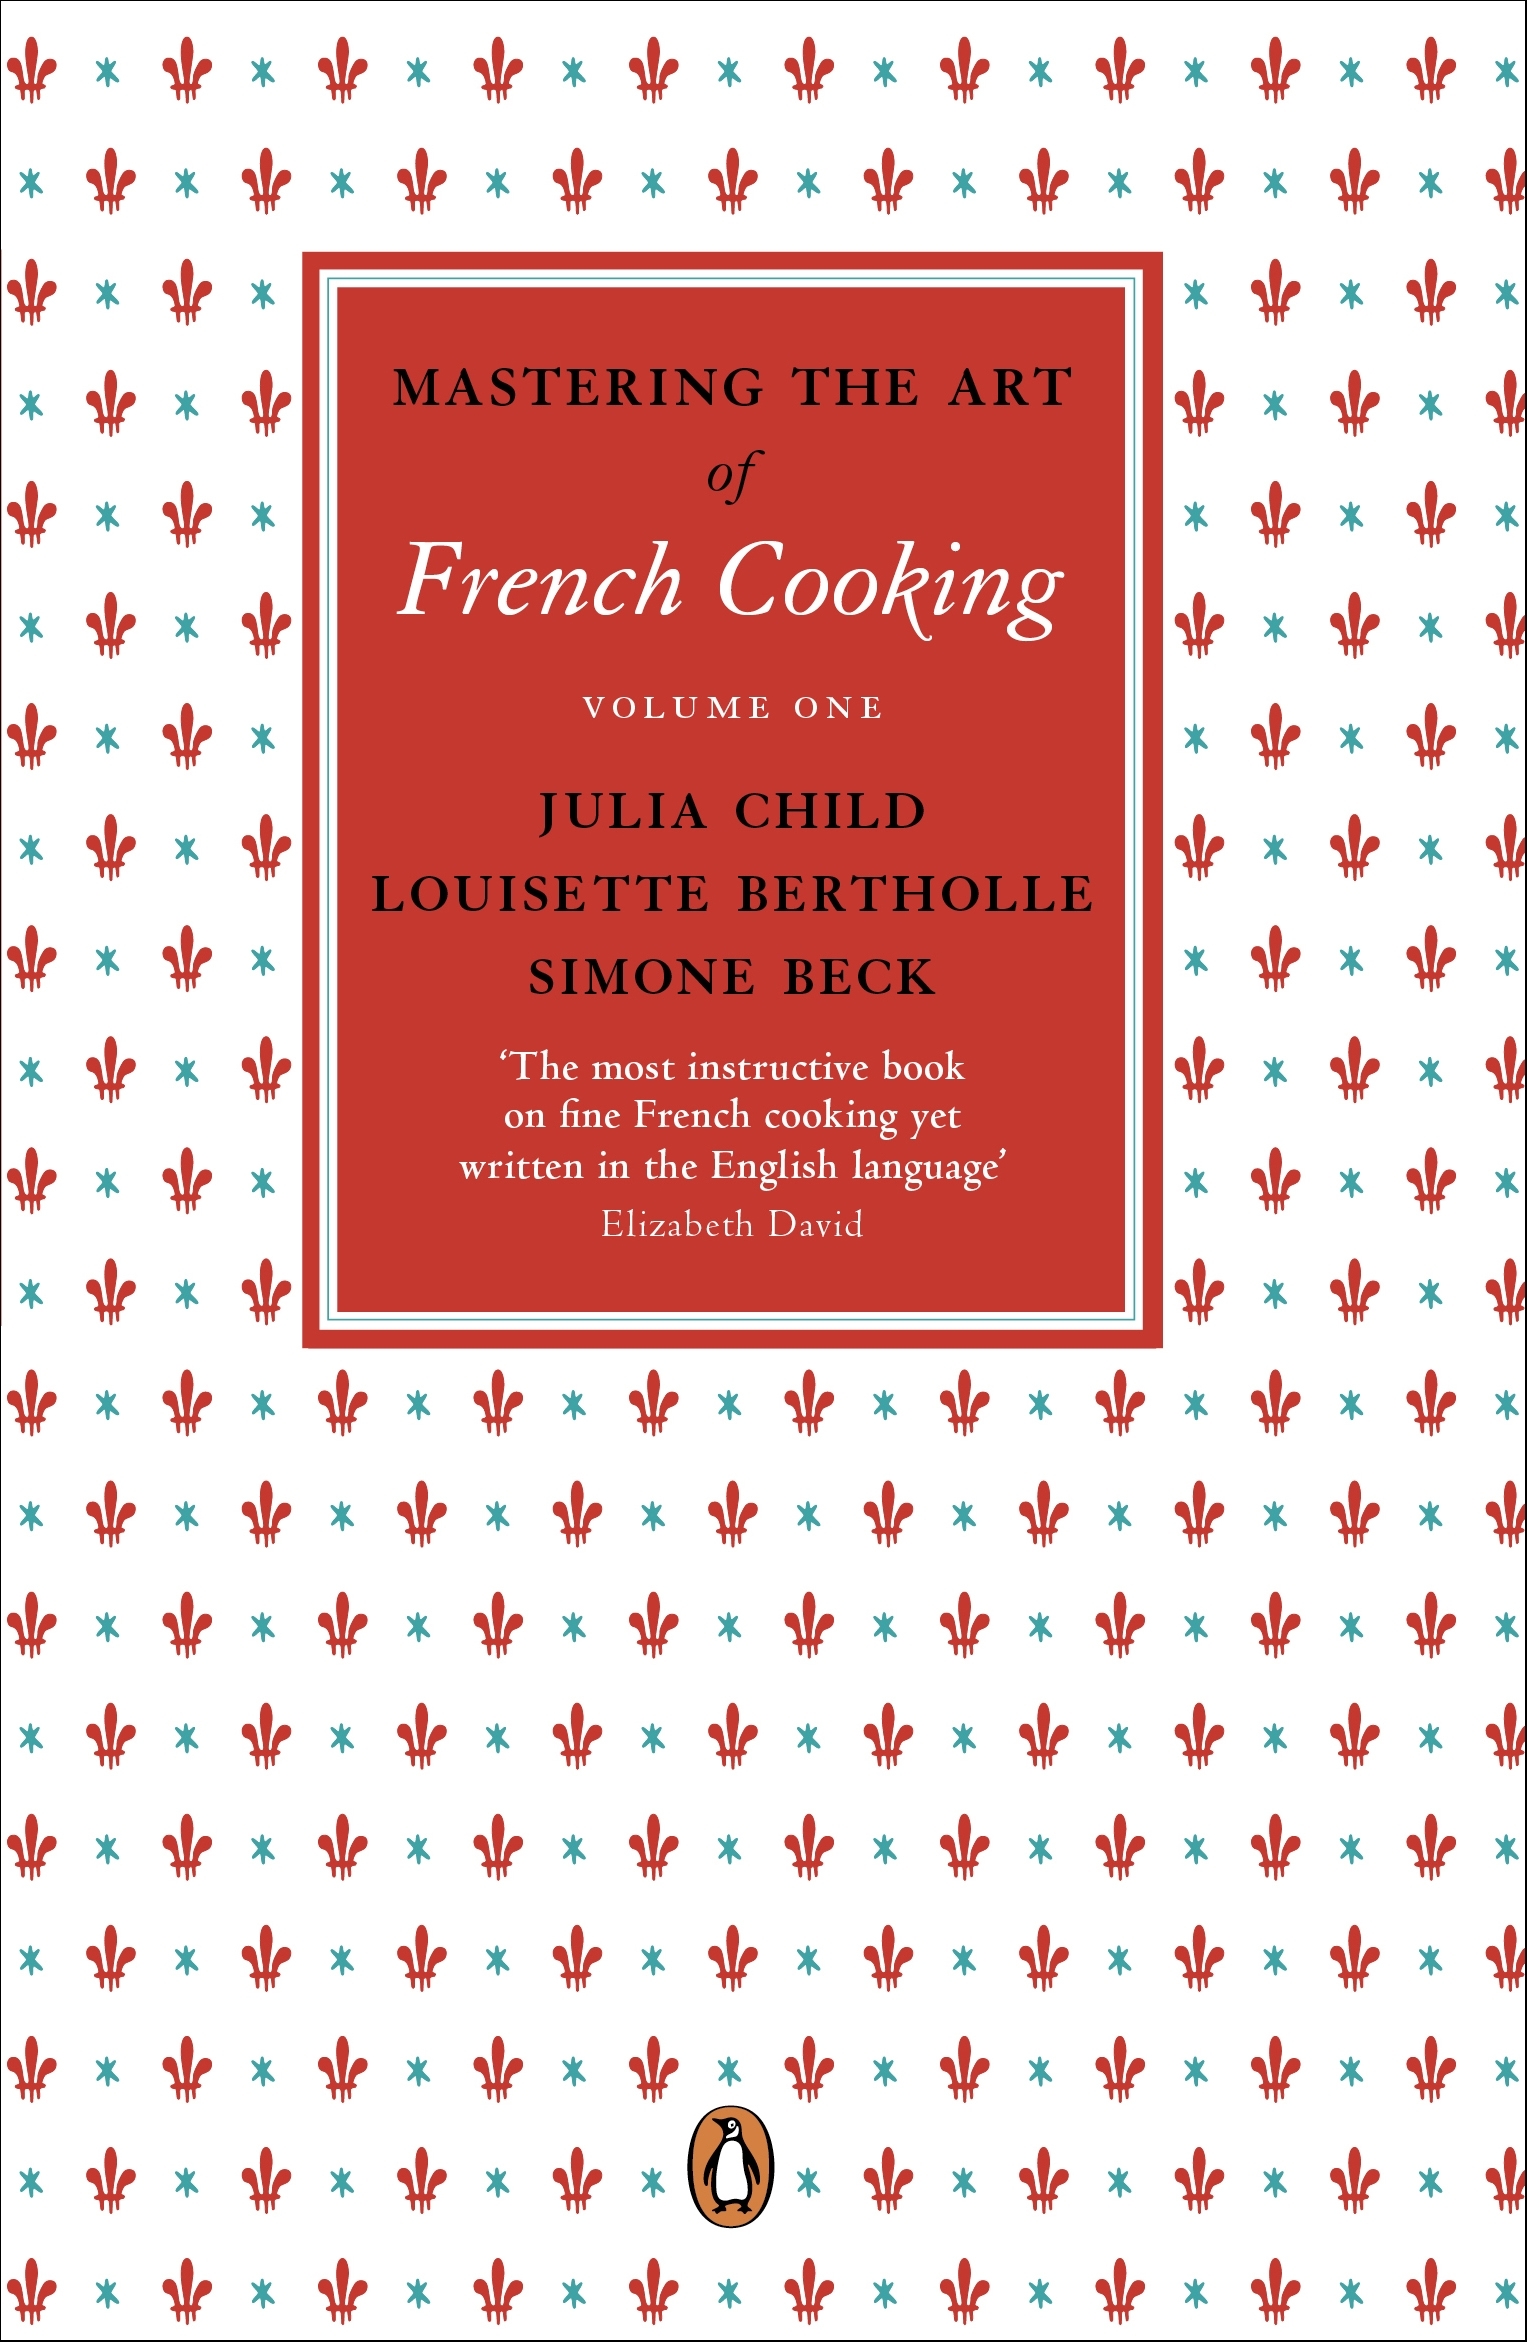 Mastering the Art Cooking of French